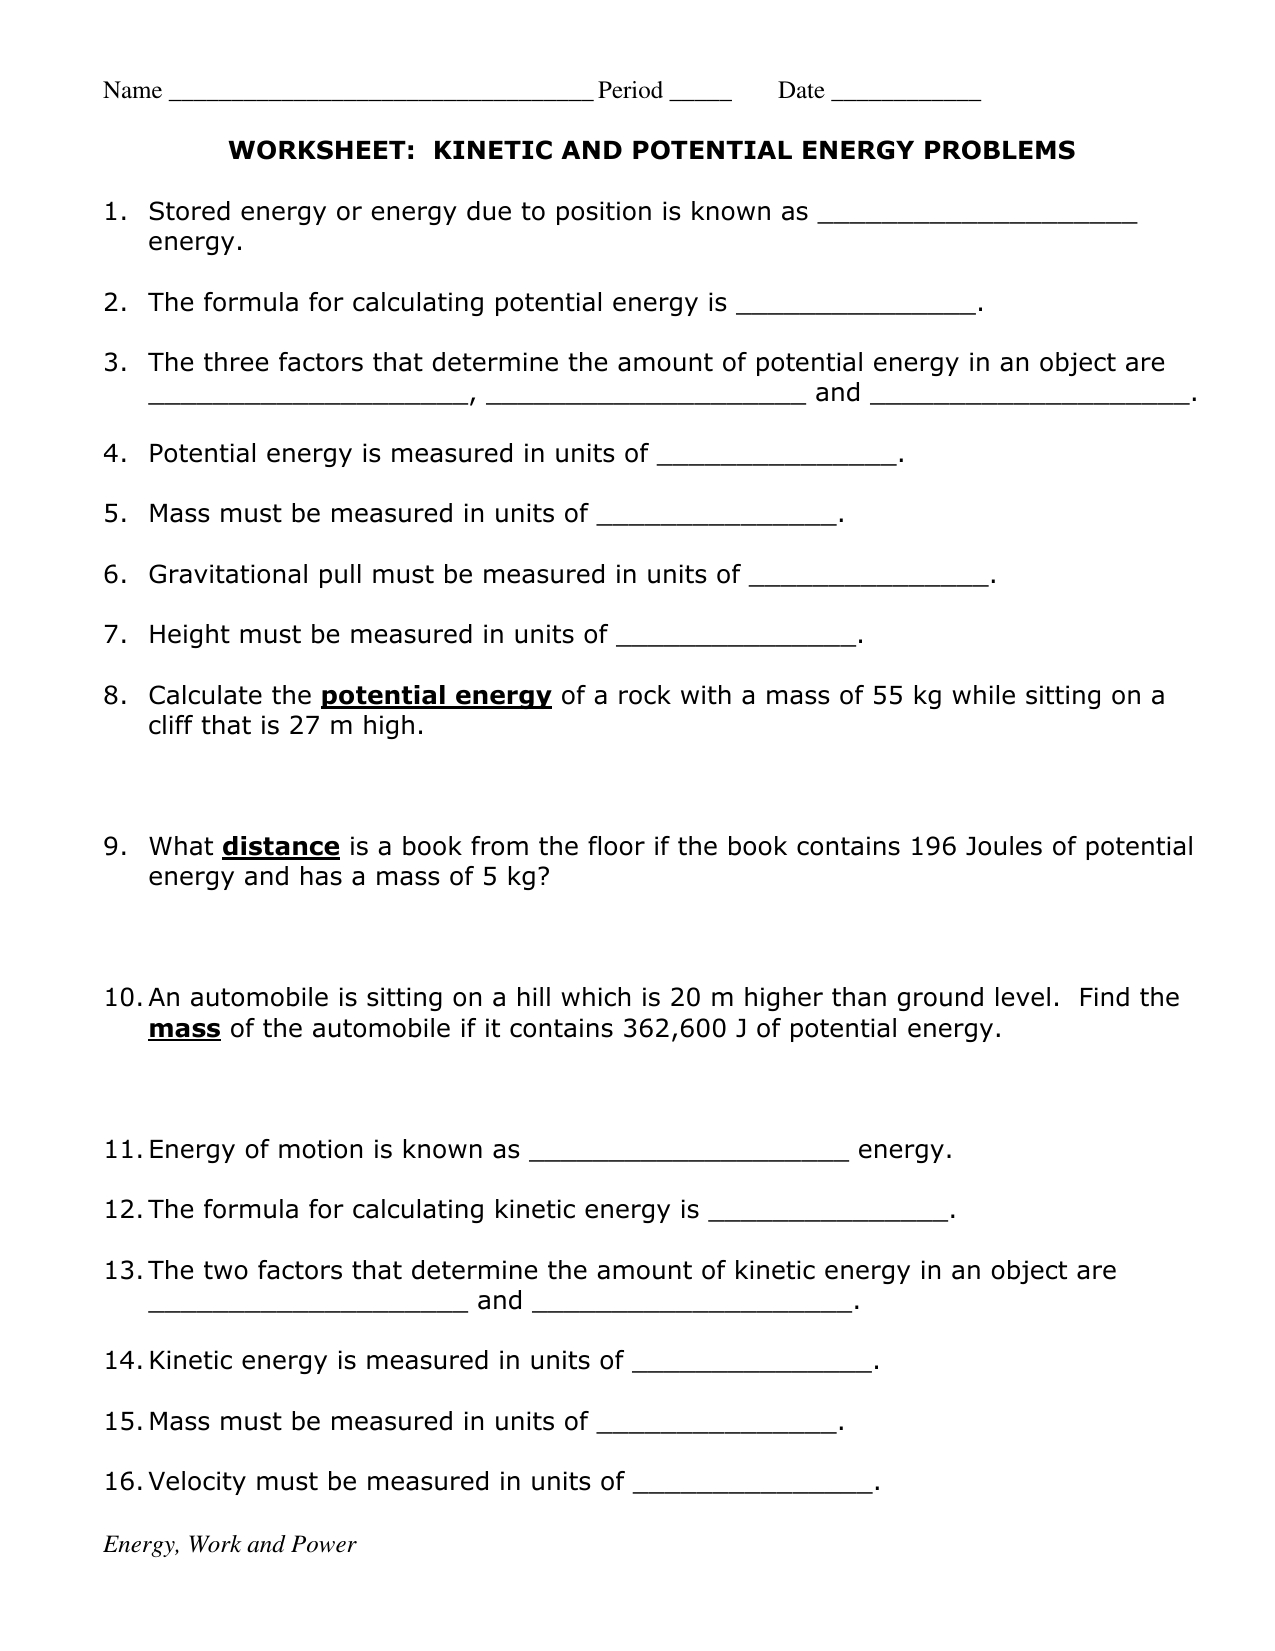 Kinetic And Potential Energy Problems For Worksheet Kinetic And Potential Energy Problems